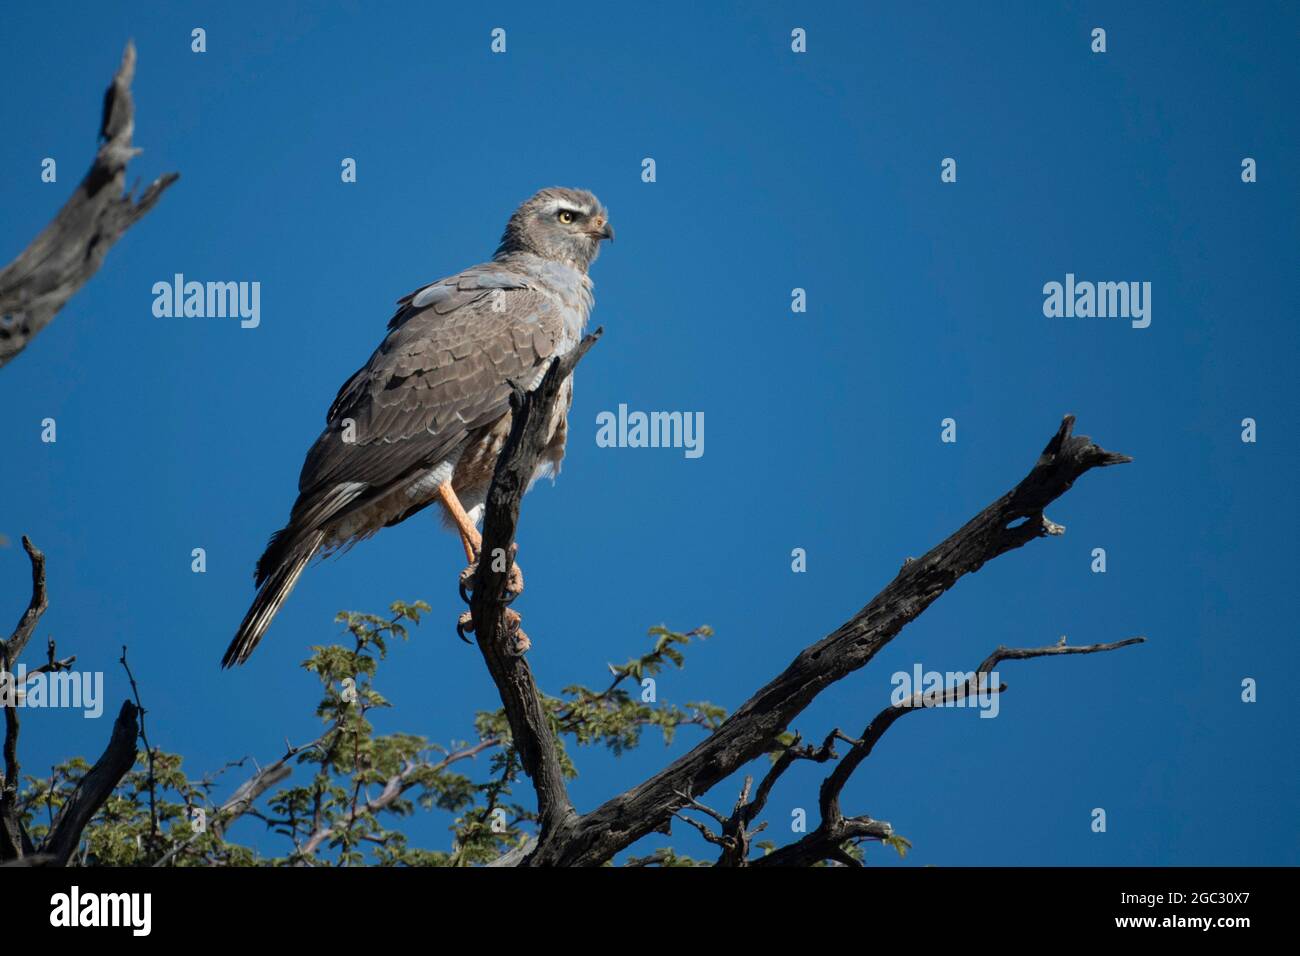 Immature Ovambo sparrowhawk, Accipiter ovampensis, Kgalagadi Transfrontier Park, South Africa Stock Photo